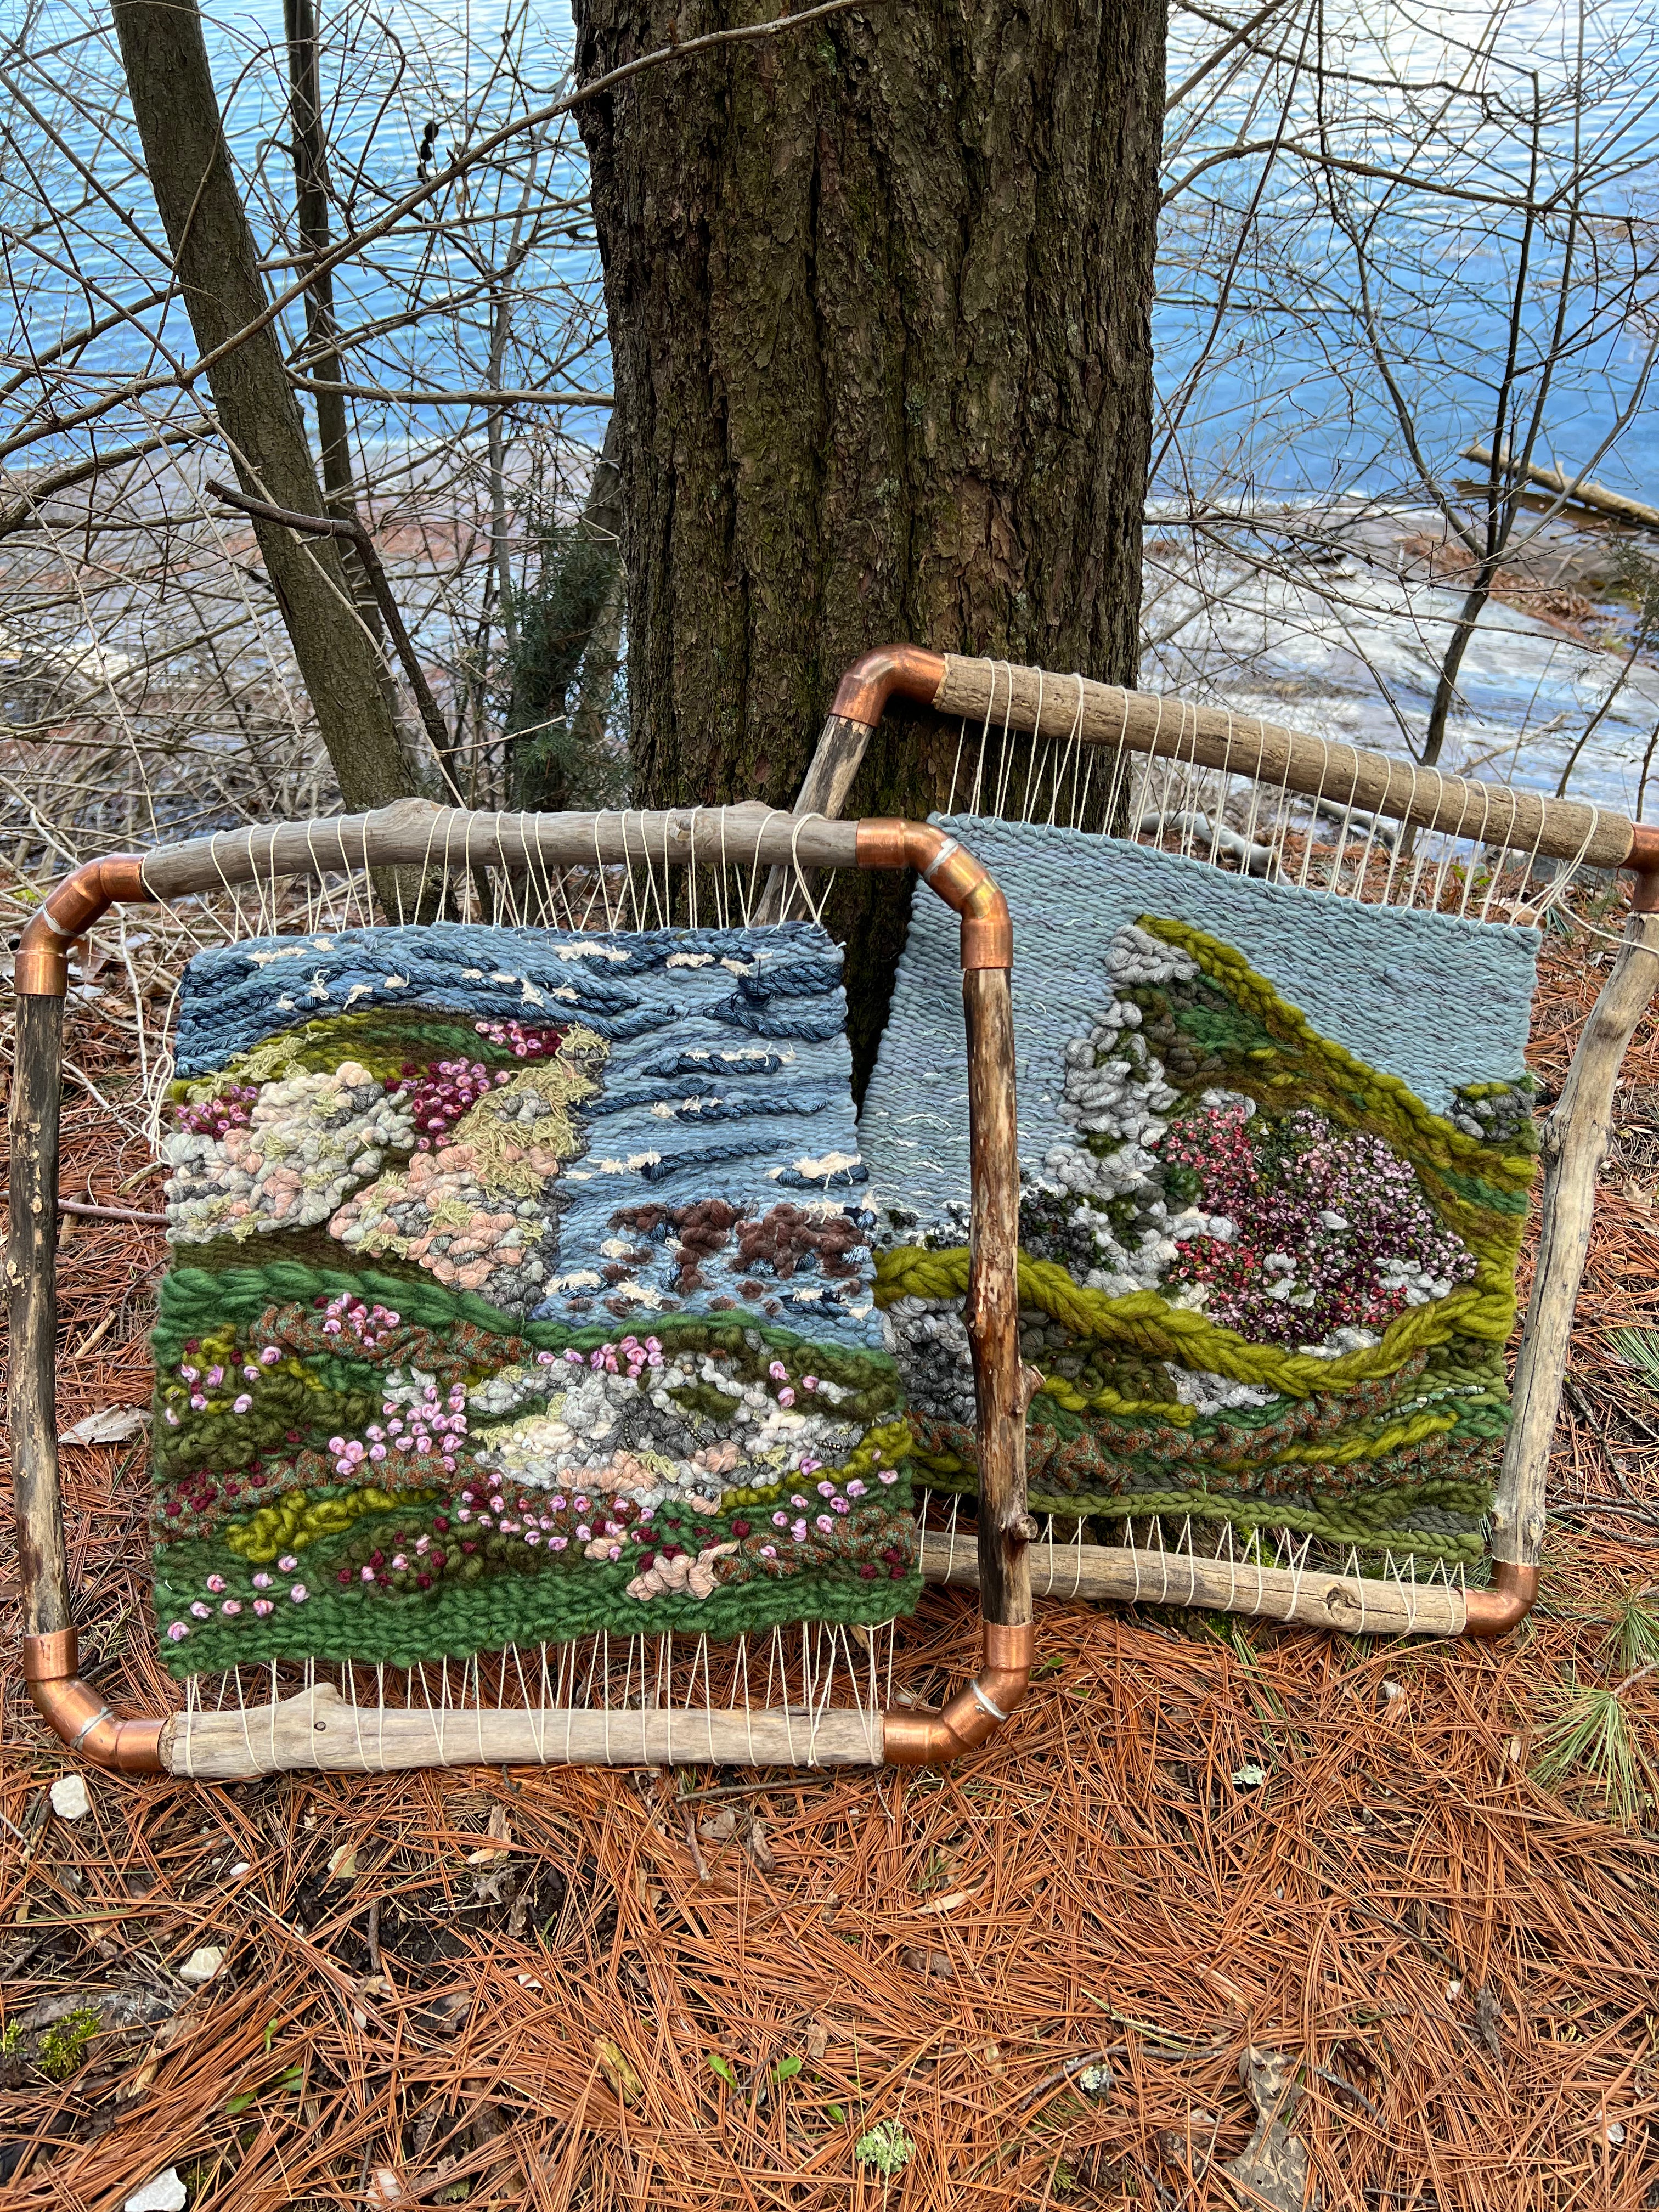 Alive Woven Wall Hanging With natural paint Harris Tweed embroidered with Pyrite agate crystals isle of Skye Scotland in driftwood and copper frame